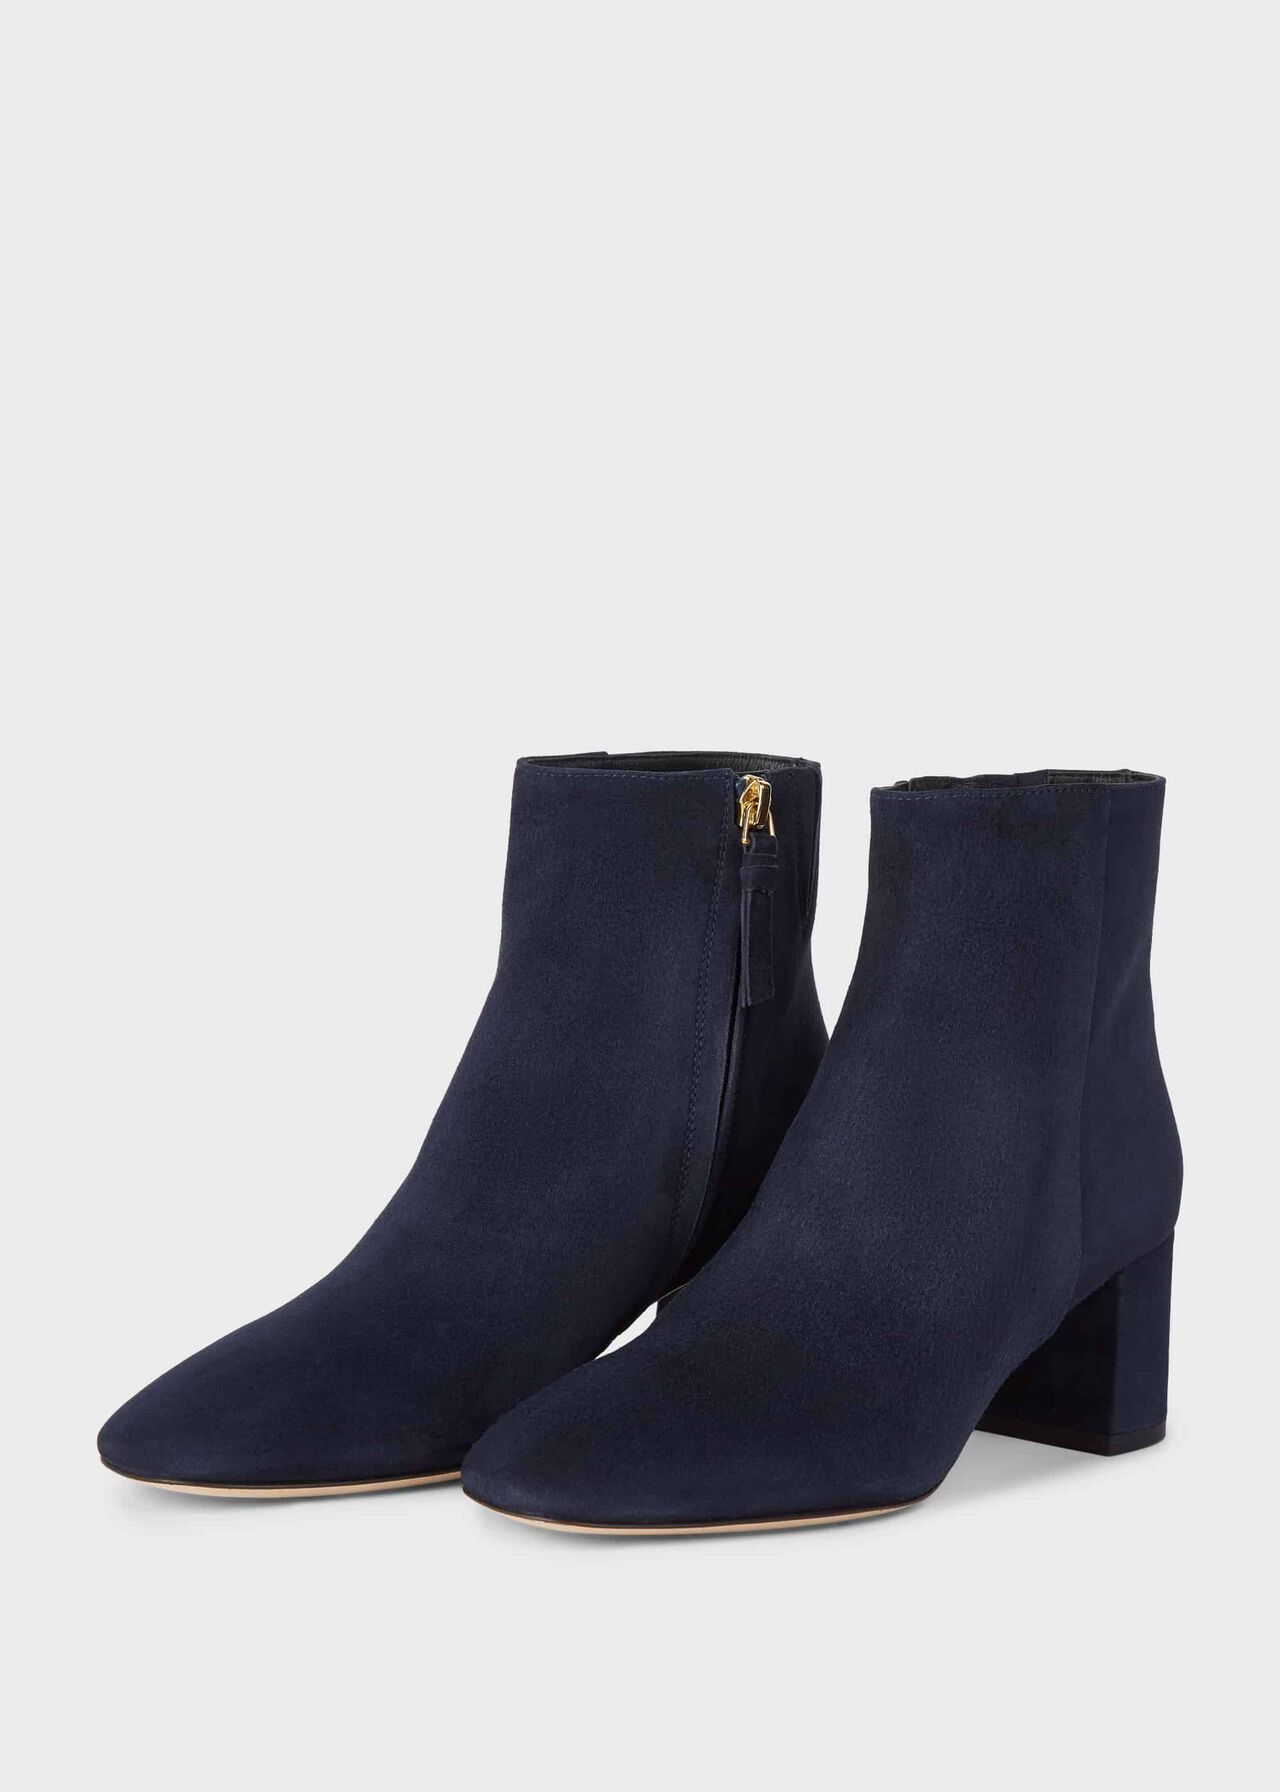 Imogen Leather Ankle Boots, Navy, hi-res